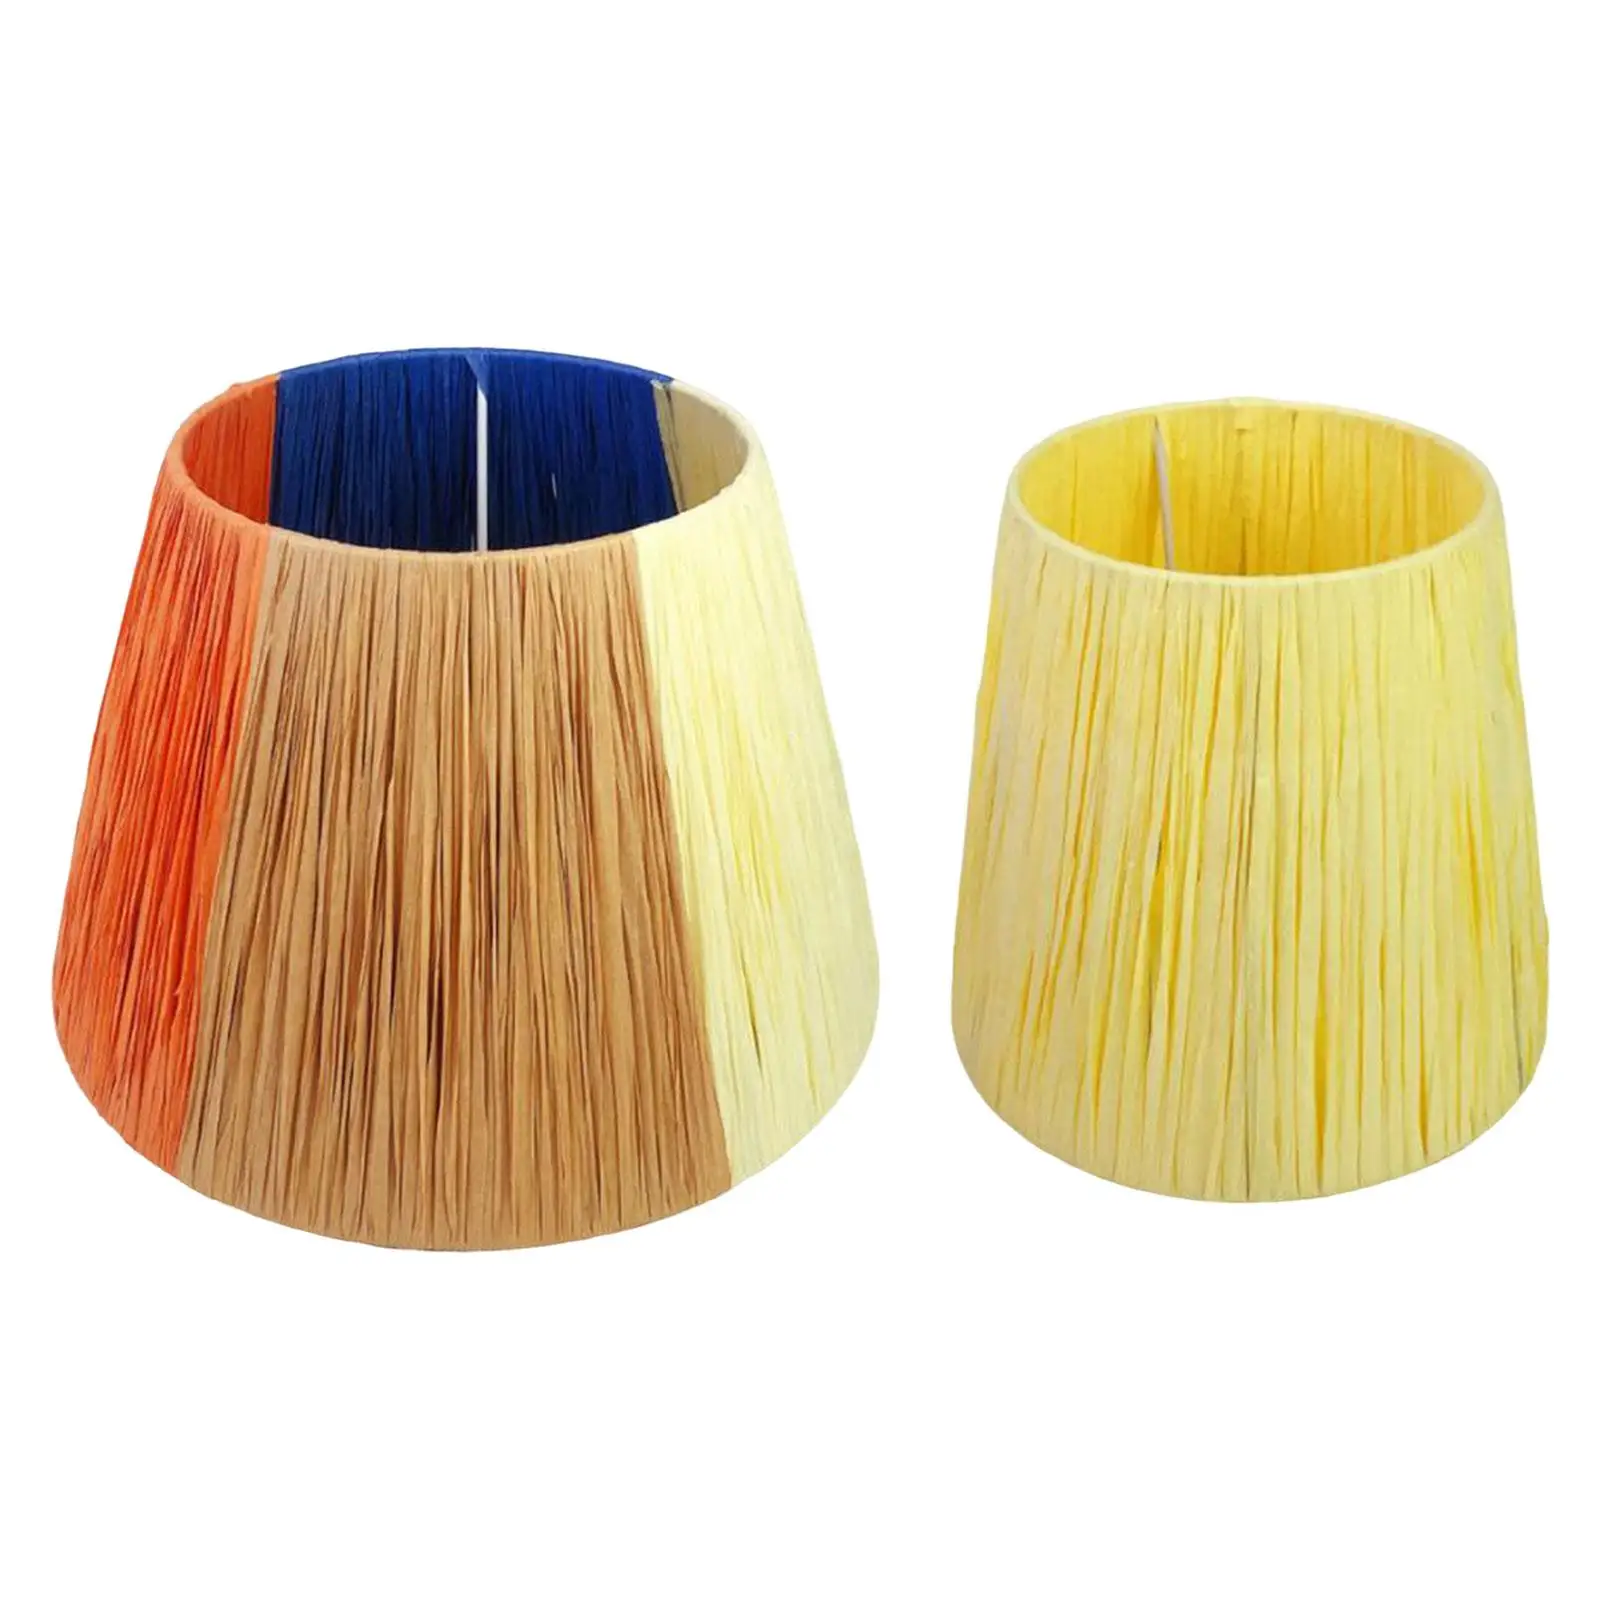 Table Lamp Shade Easy to Install Nordic Practical Light Fixture Shade Raffia Lampshade for Table Home Dorm Kitchen Dining Room